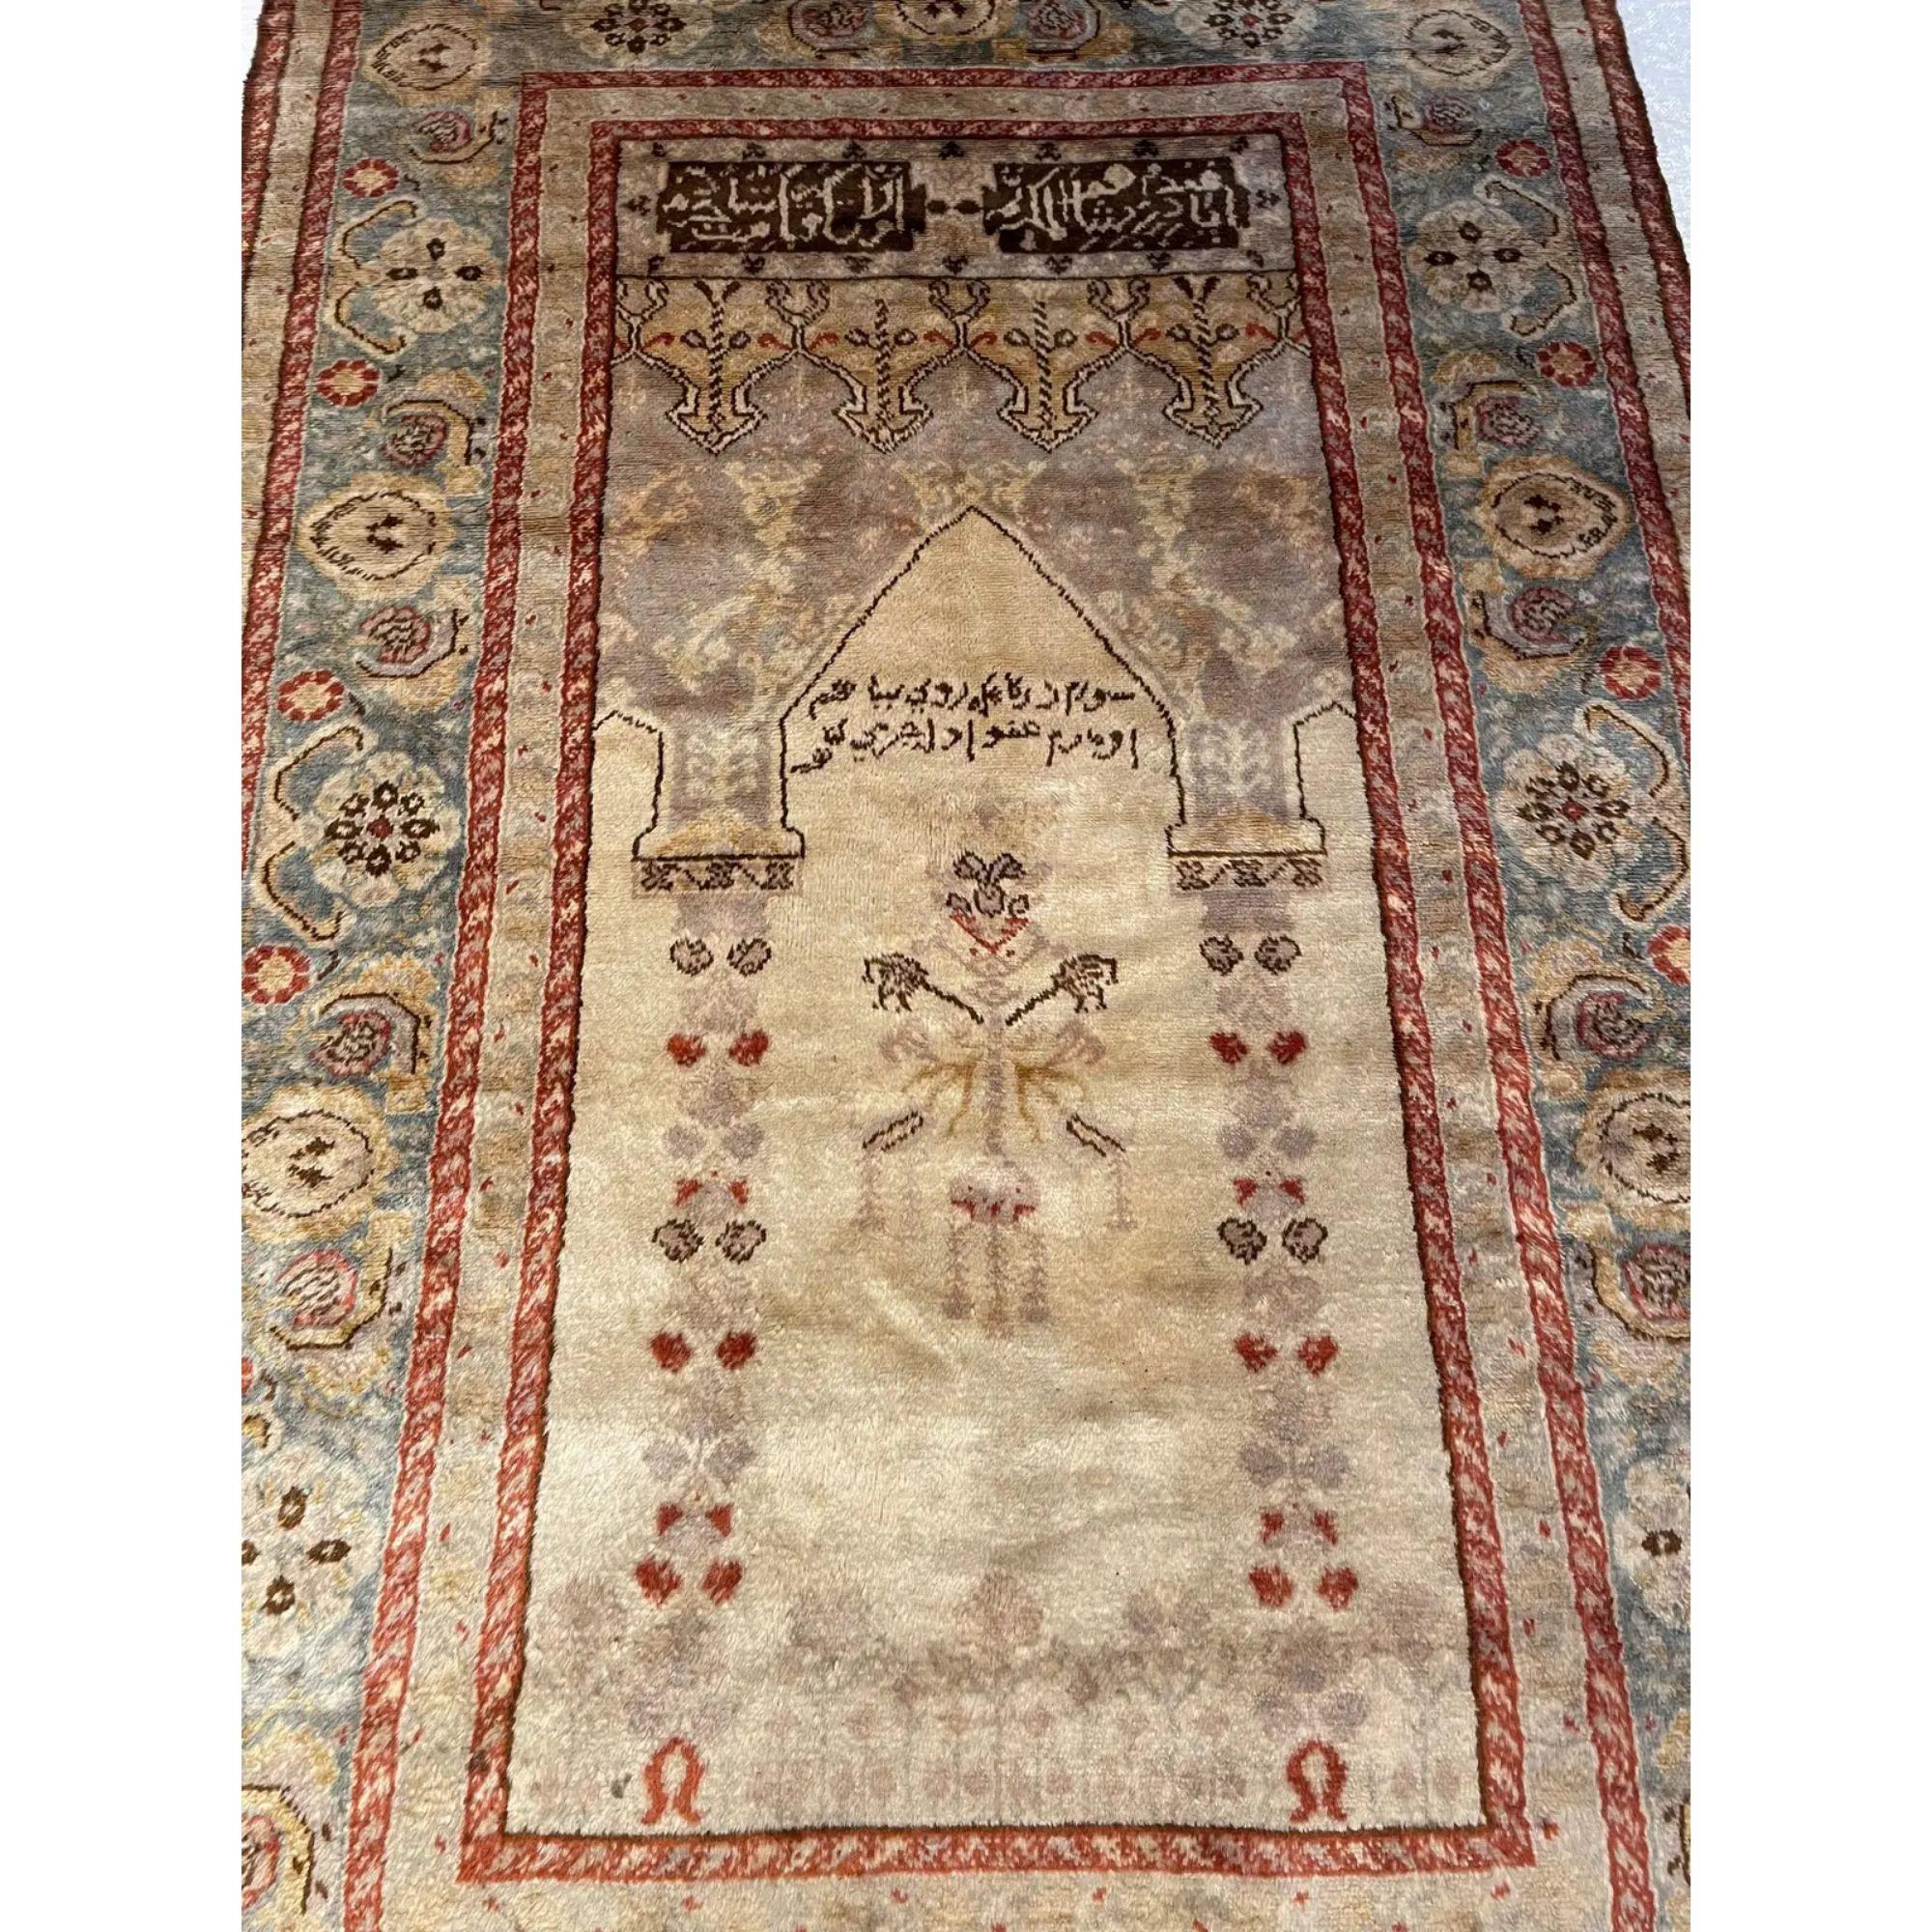 One of the most unusual Turkish Carpets with 100% the softest wool that has existed. Made with vegetable dyes and has the artist's signature on it from Ca.1900. One of a kind and collectible item